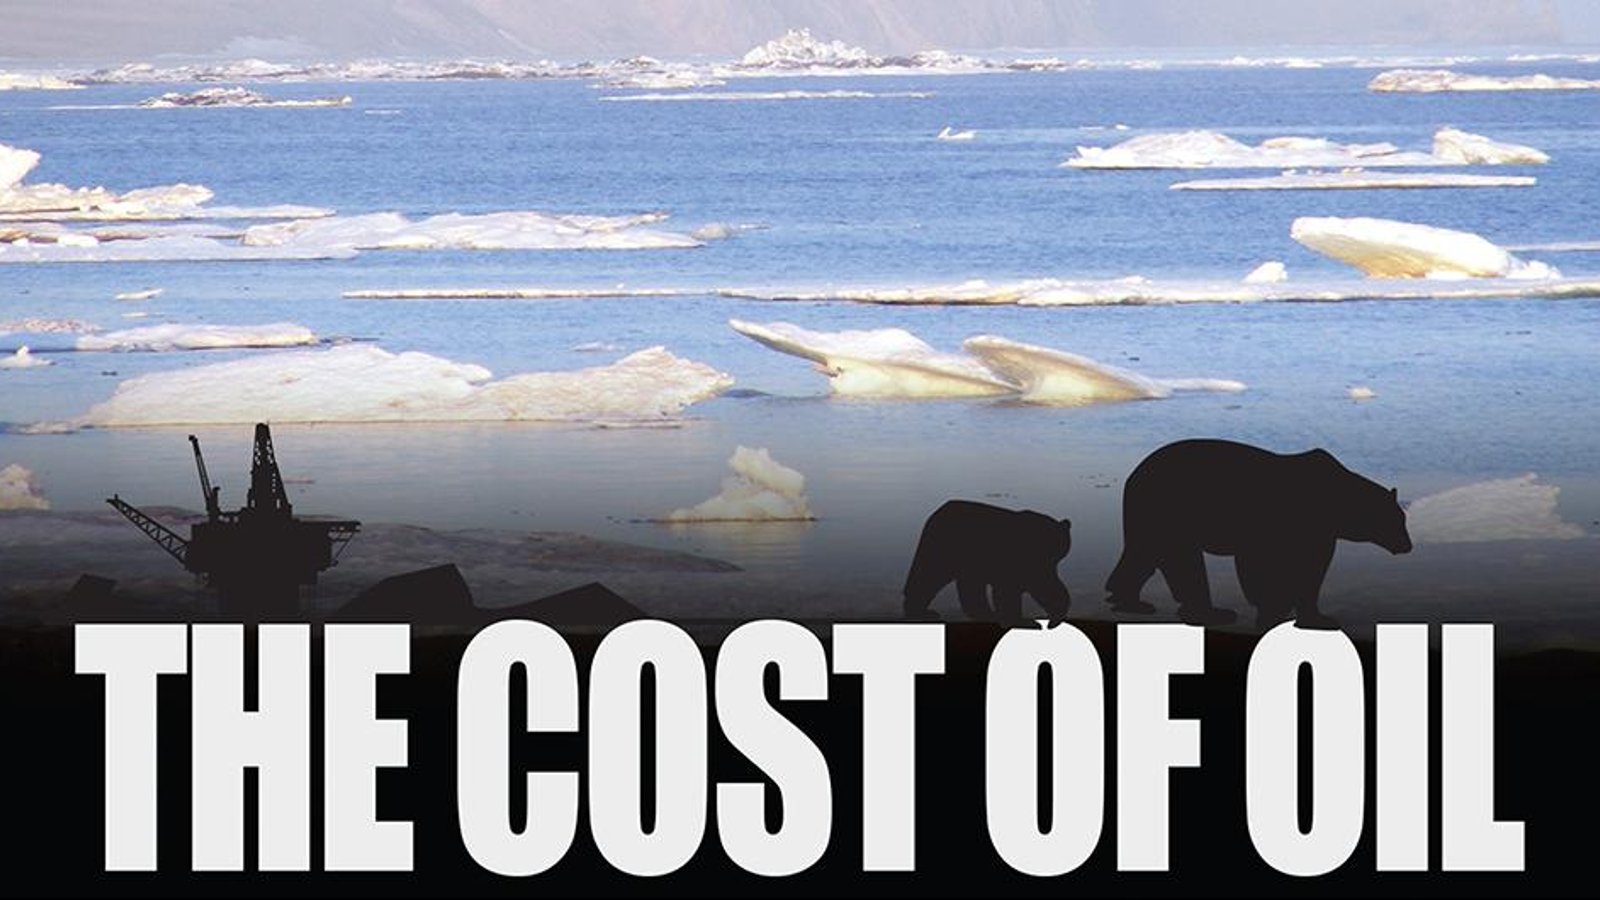 The Cost of Oil